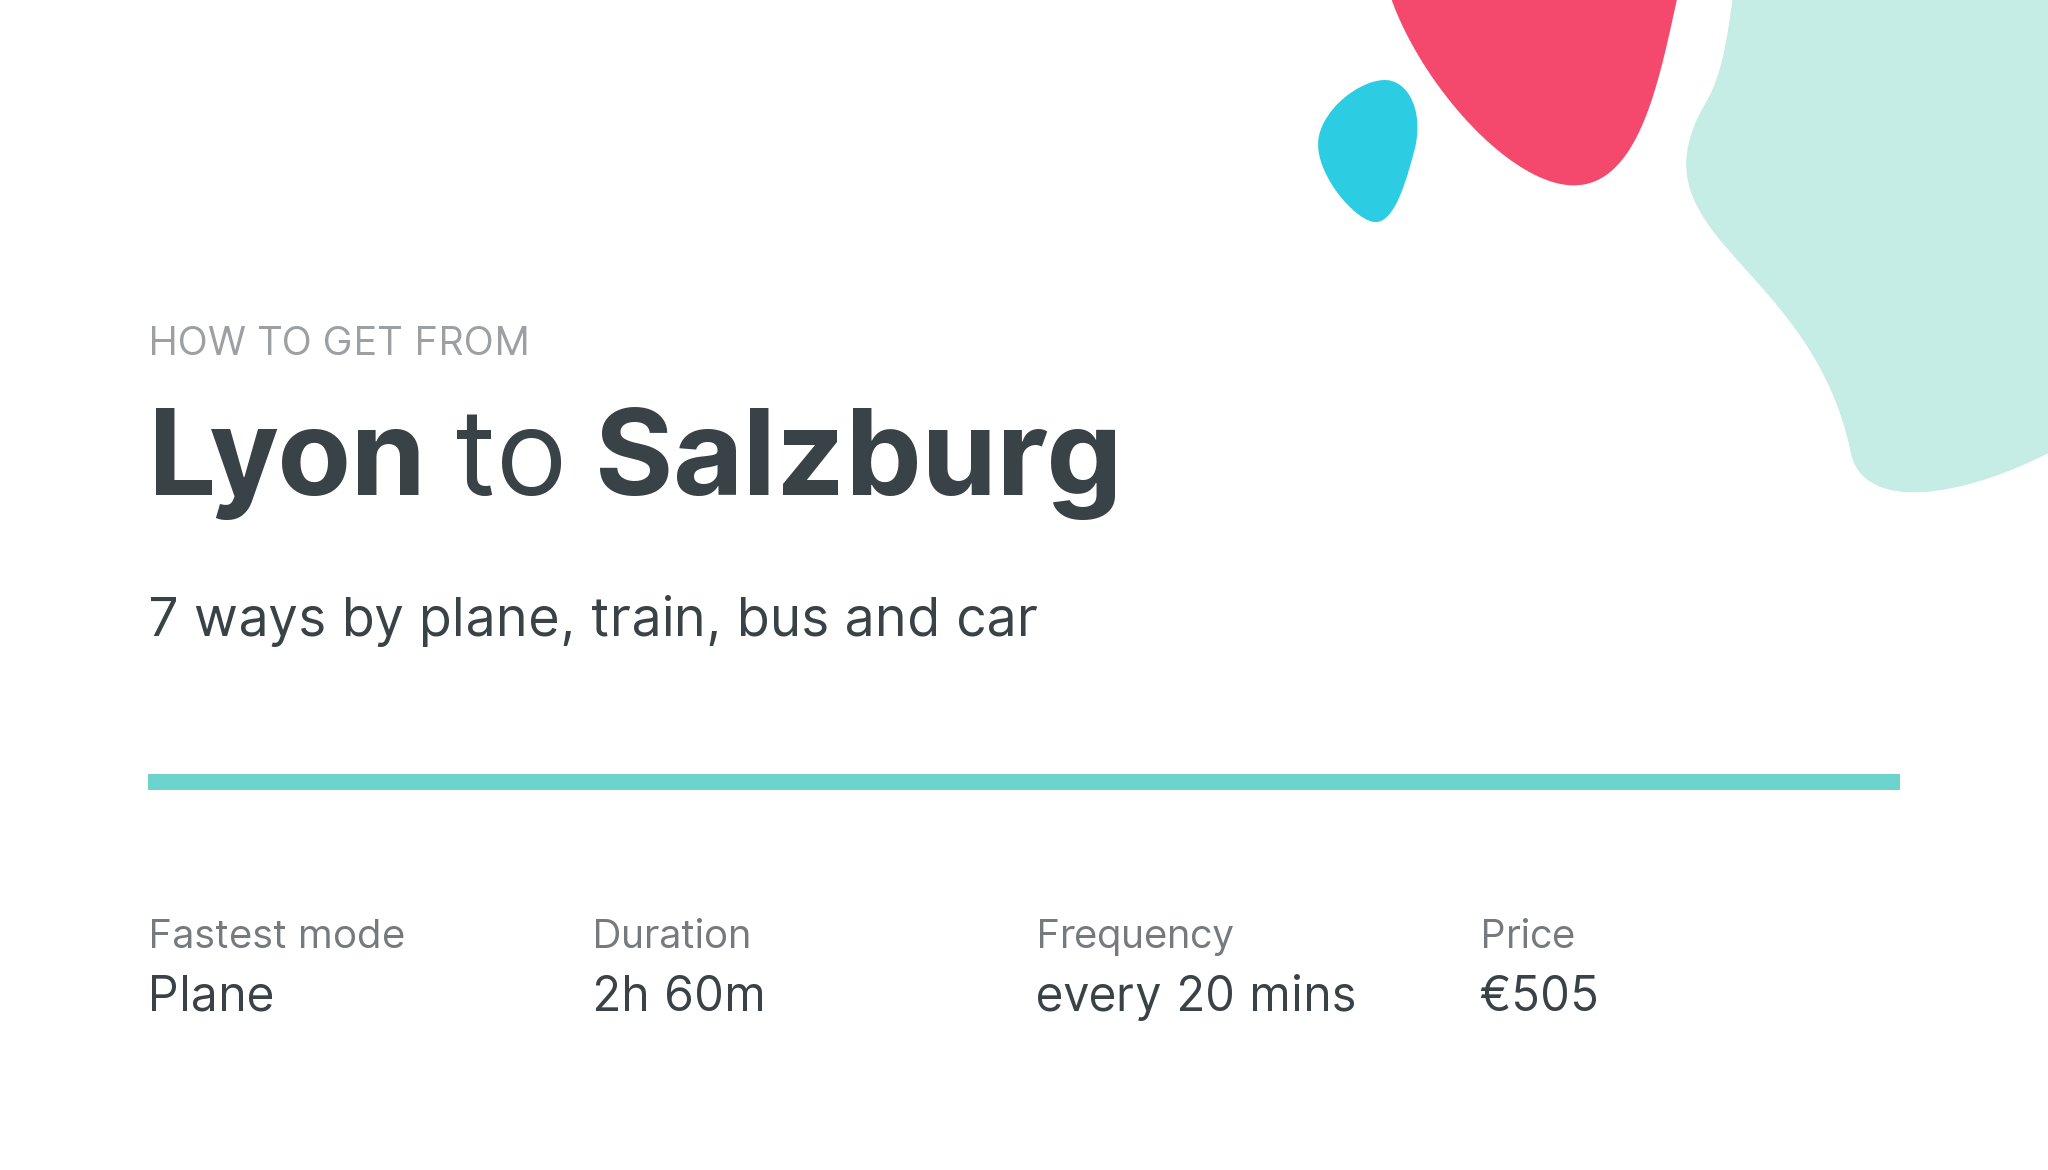 How do I get from Lyon to Salzburg